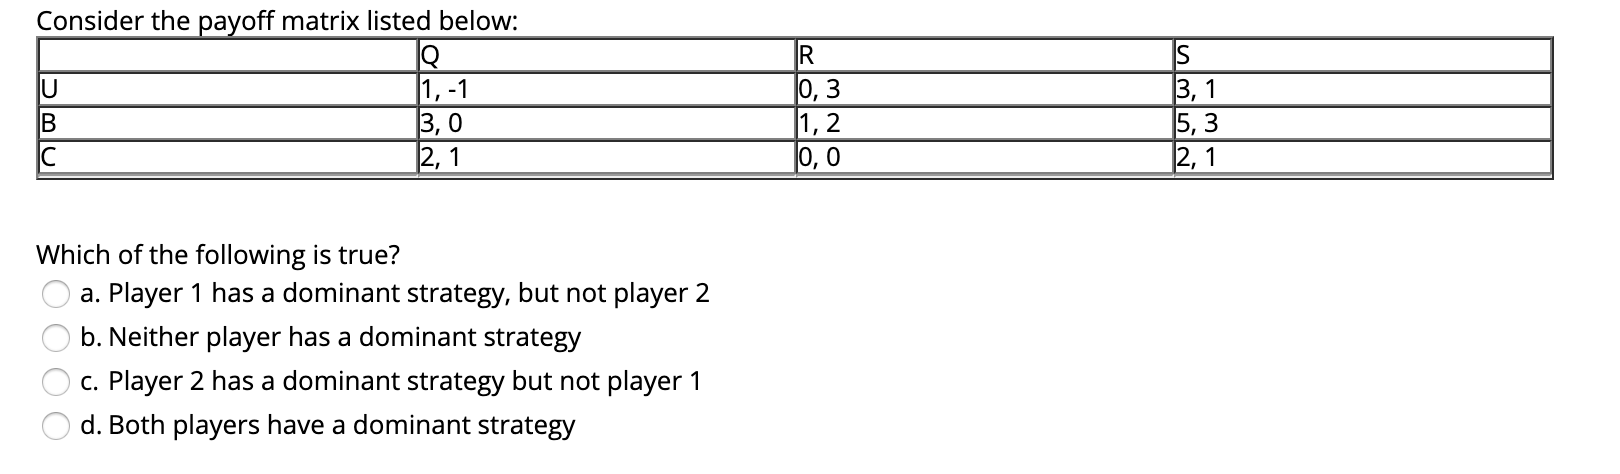 Consider the payoff matrix listed below:
IS
|1, -1
3, 0
|0, 3
|1, 2
|0, 0
3, 1
5, 3
|2,1
2, 1
Which of the following is true?
a. Player 1 has a dominant strategy, but not player 2
b. Neither player has a dominant strategy
c. Player 2 has a dominant strategy but not player 1
d. Both players have a dominant strategy
